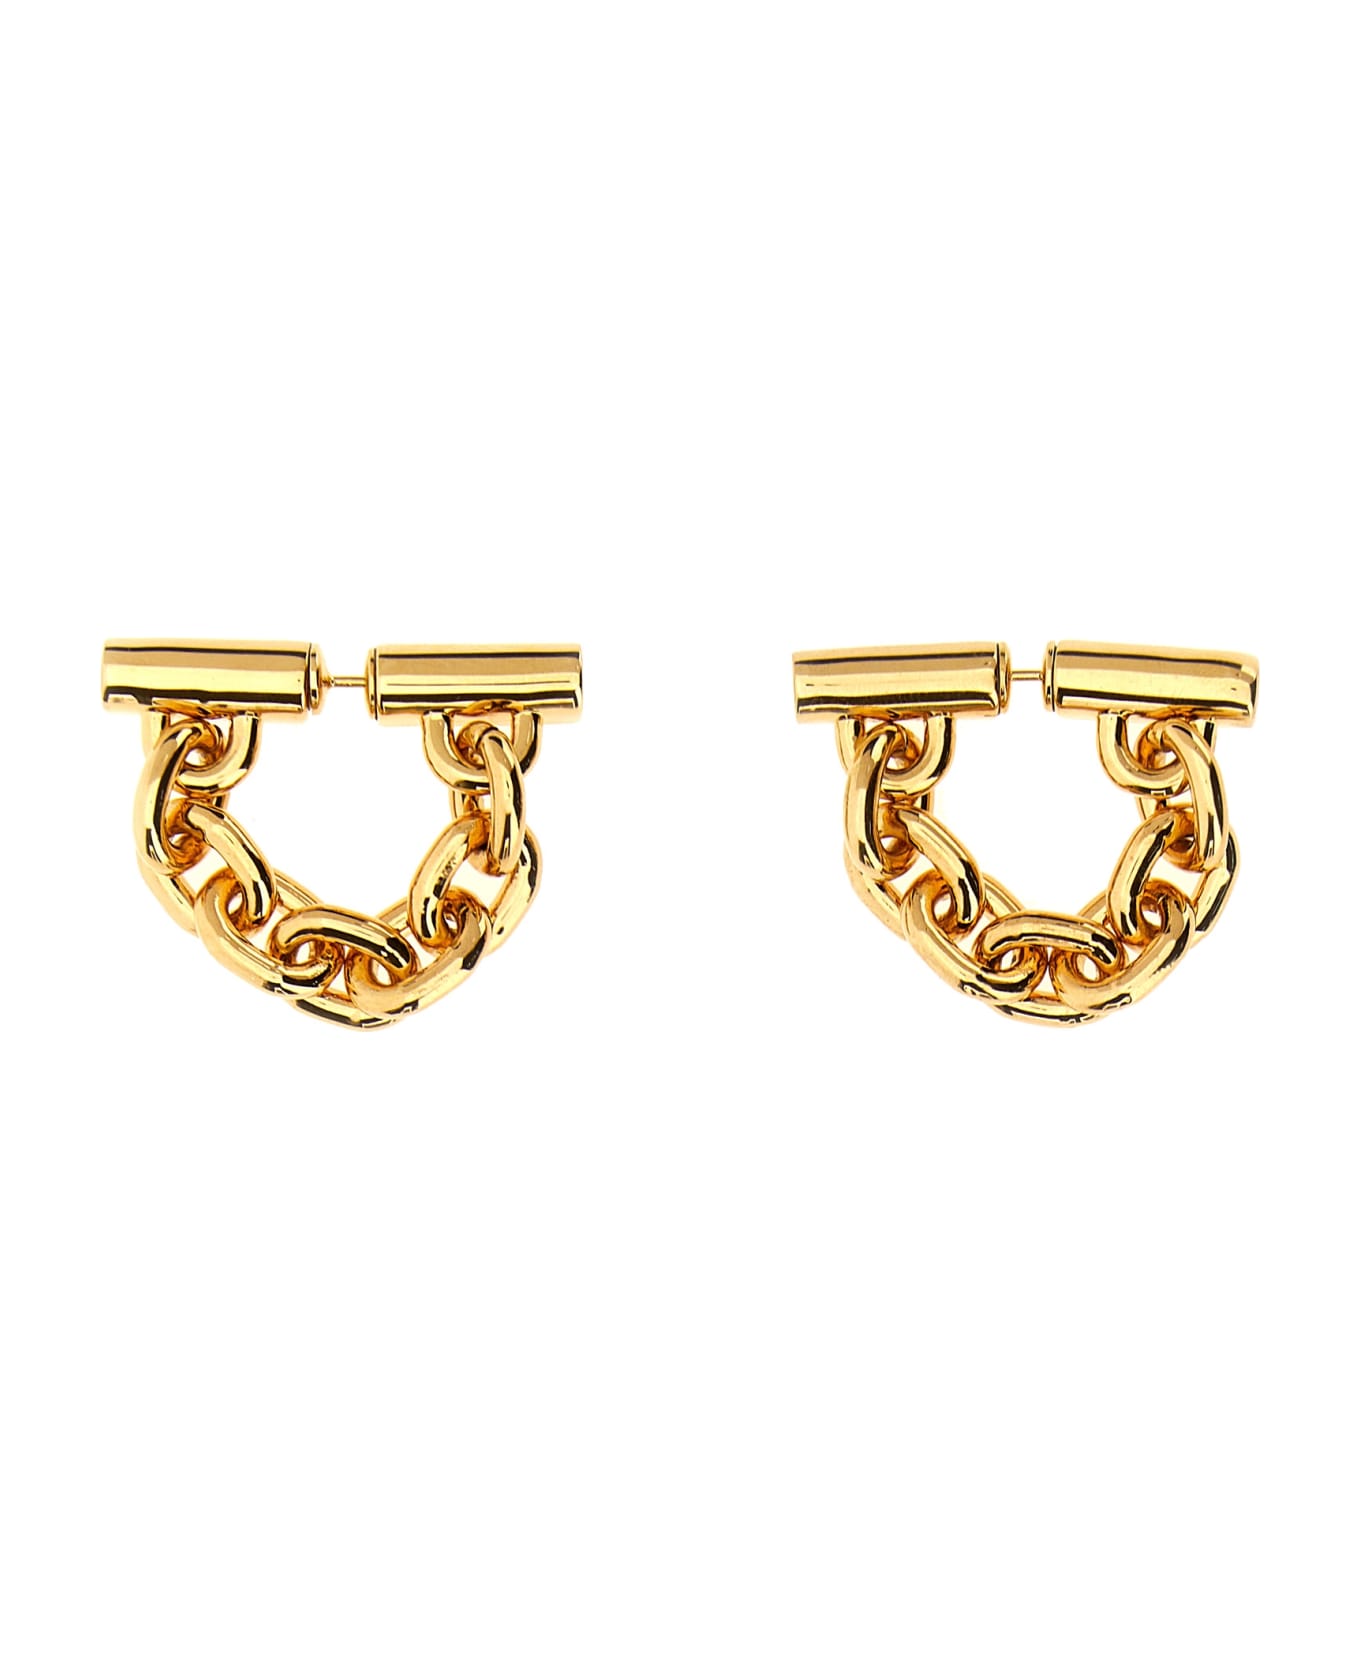 Paco Rabanne 'xl Link Chain' Earrings - Gold ジュエリー